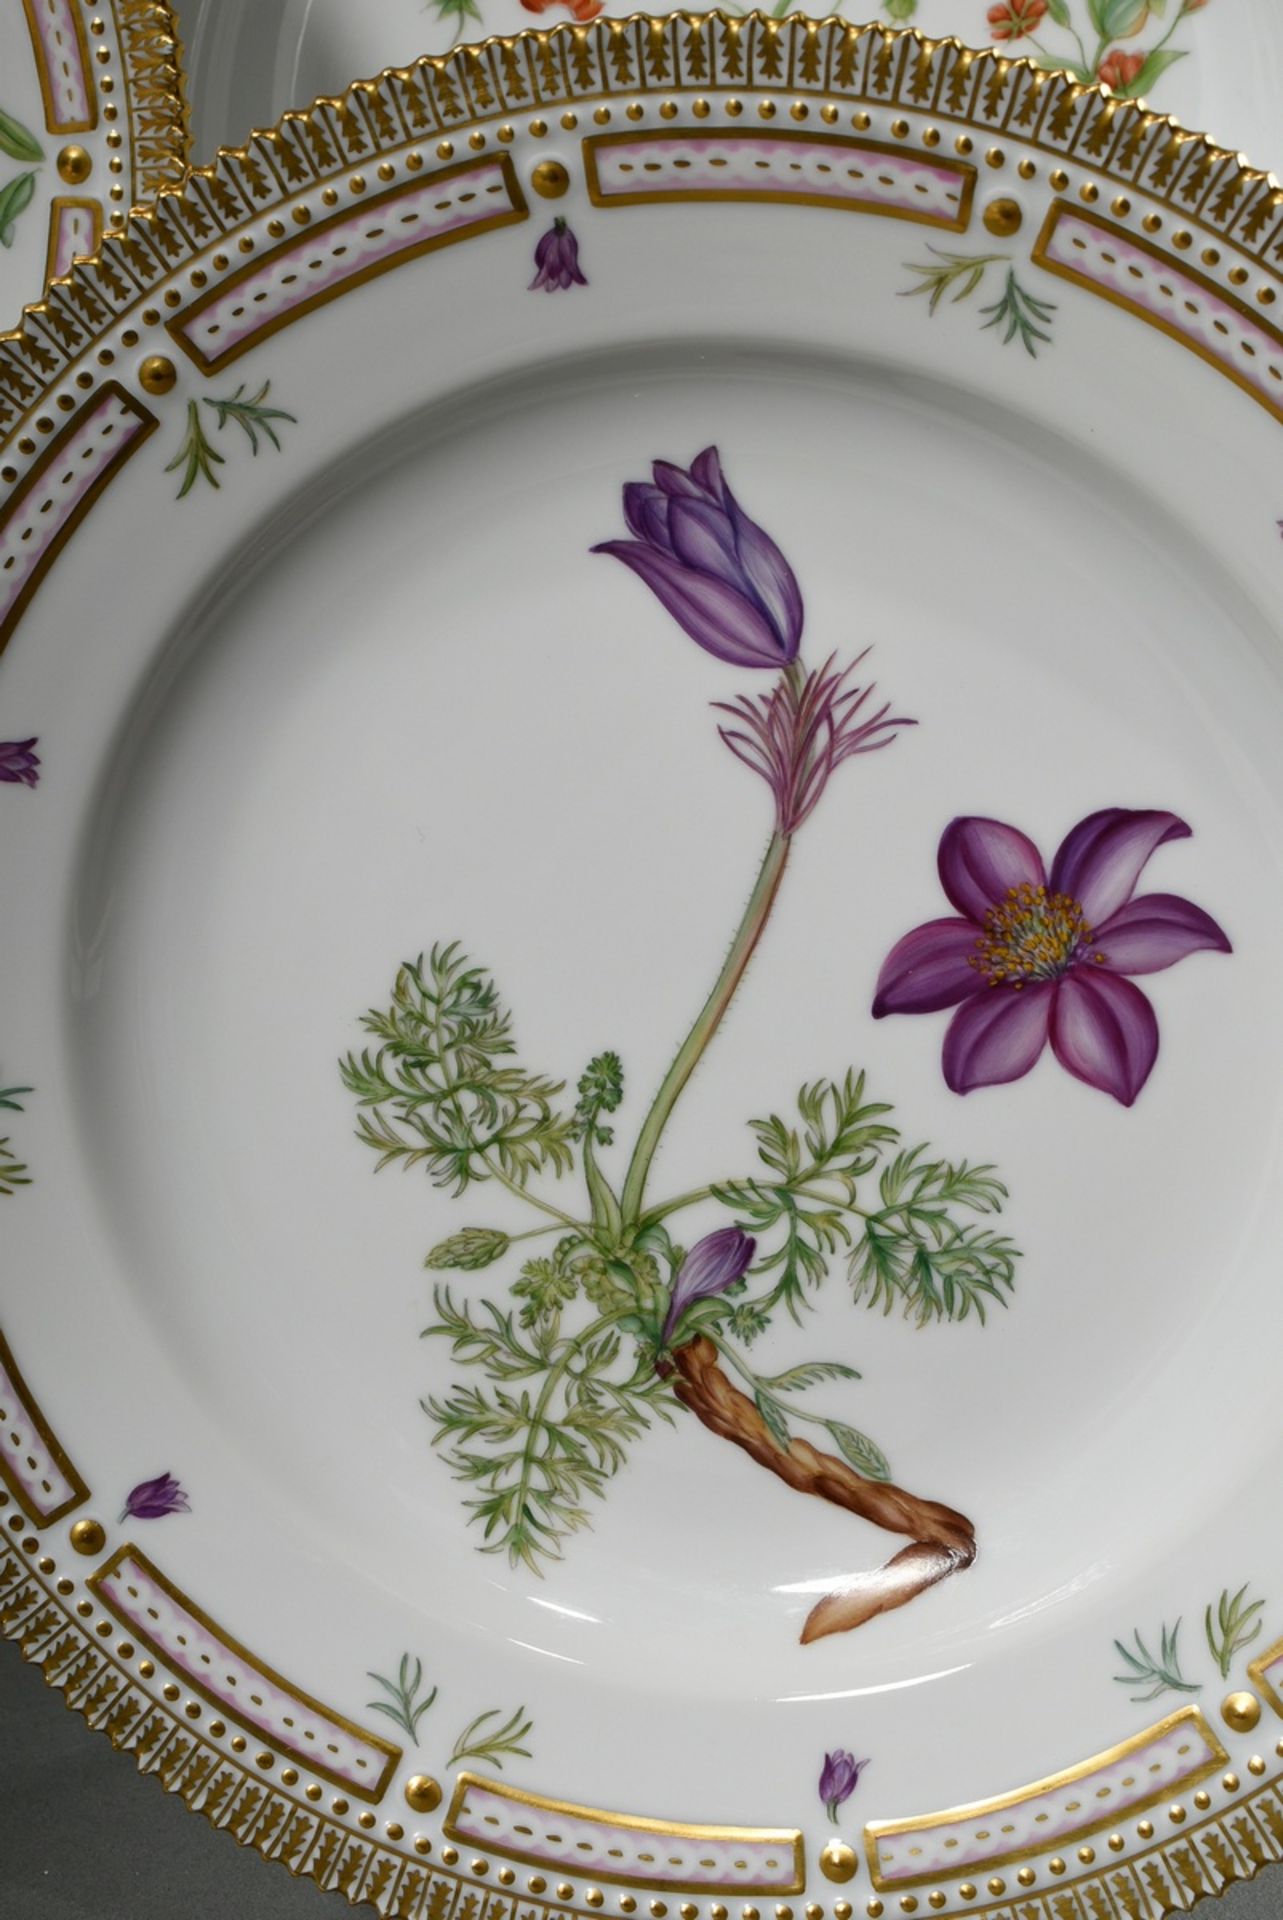 6 Royal Copenhagen "Flora Danica" dinner plates with polychrome painting in the mirror and gold dec - Image 6 of 15